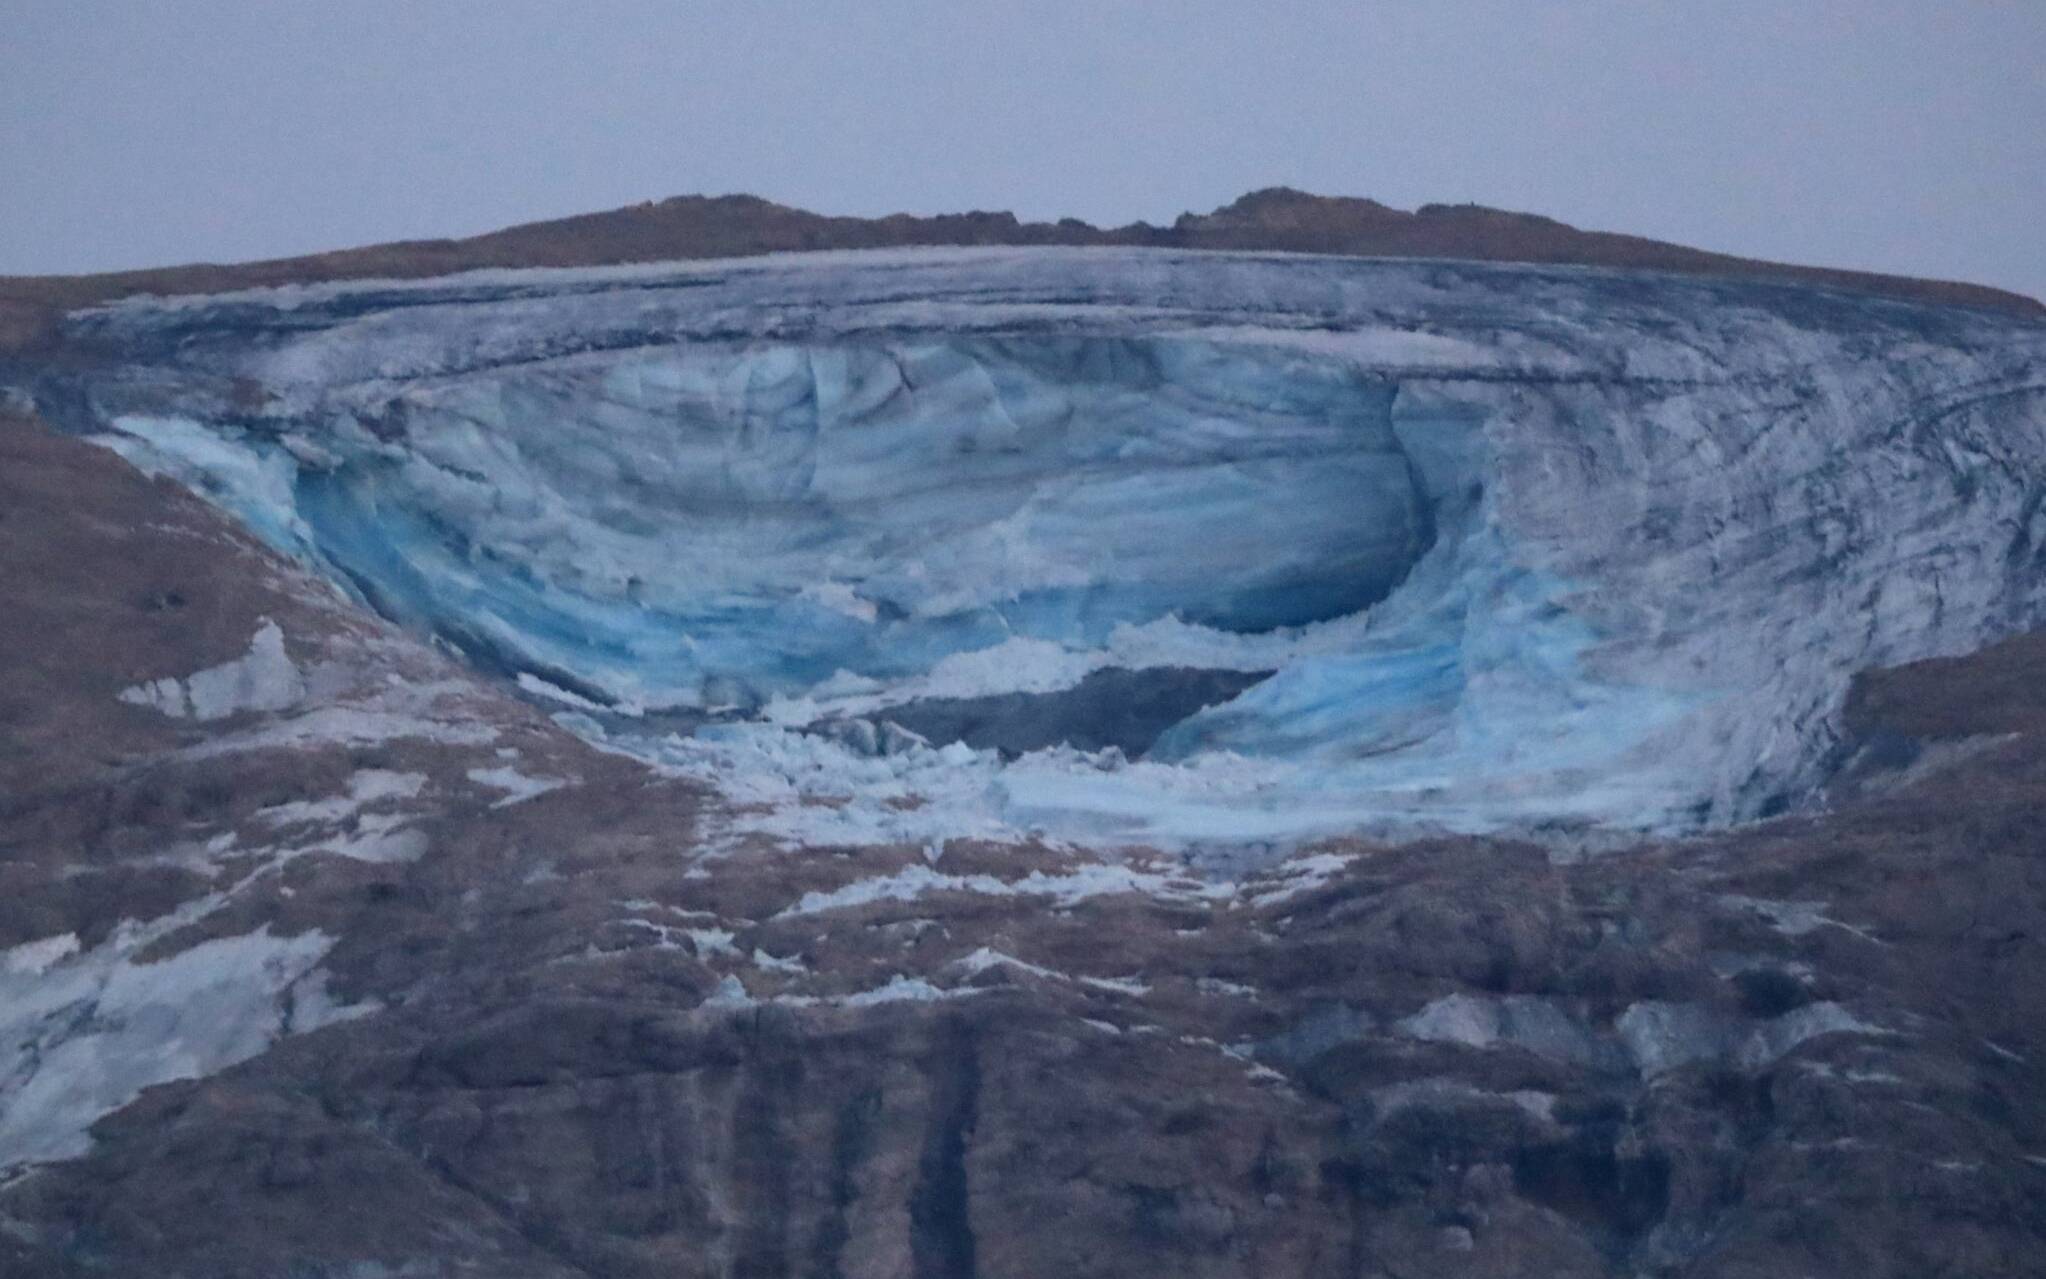 This photograph taken on July 3, 2022 from Canazei, shows the ice serac that collapsed on the Marmolada, near Punta Rocca, killing six people. - An avalanche set off by the collapse of the largest glacier in the Italian Alps killed at least six people and injured eight others on July 3, 2022, an emergency services spokeswoman said. The glacier collapsed on the mountain of Marmolada, the highest in the Italian Dolomites, near the hamlet of Punta Rocca, on the route normally taken to reach its summit. (Photo by Pierre TEYSSOT / AFP)